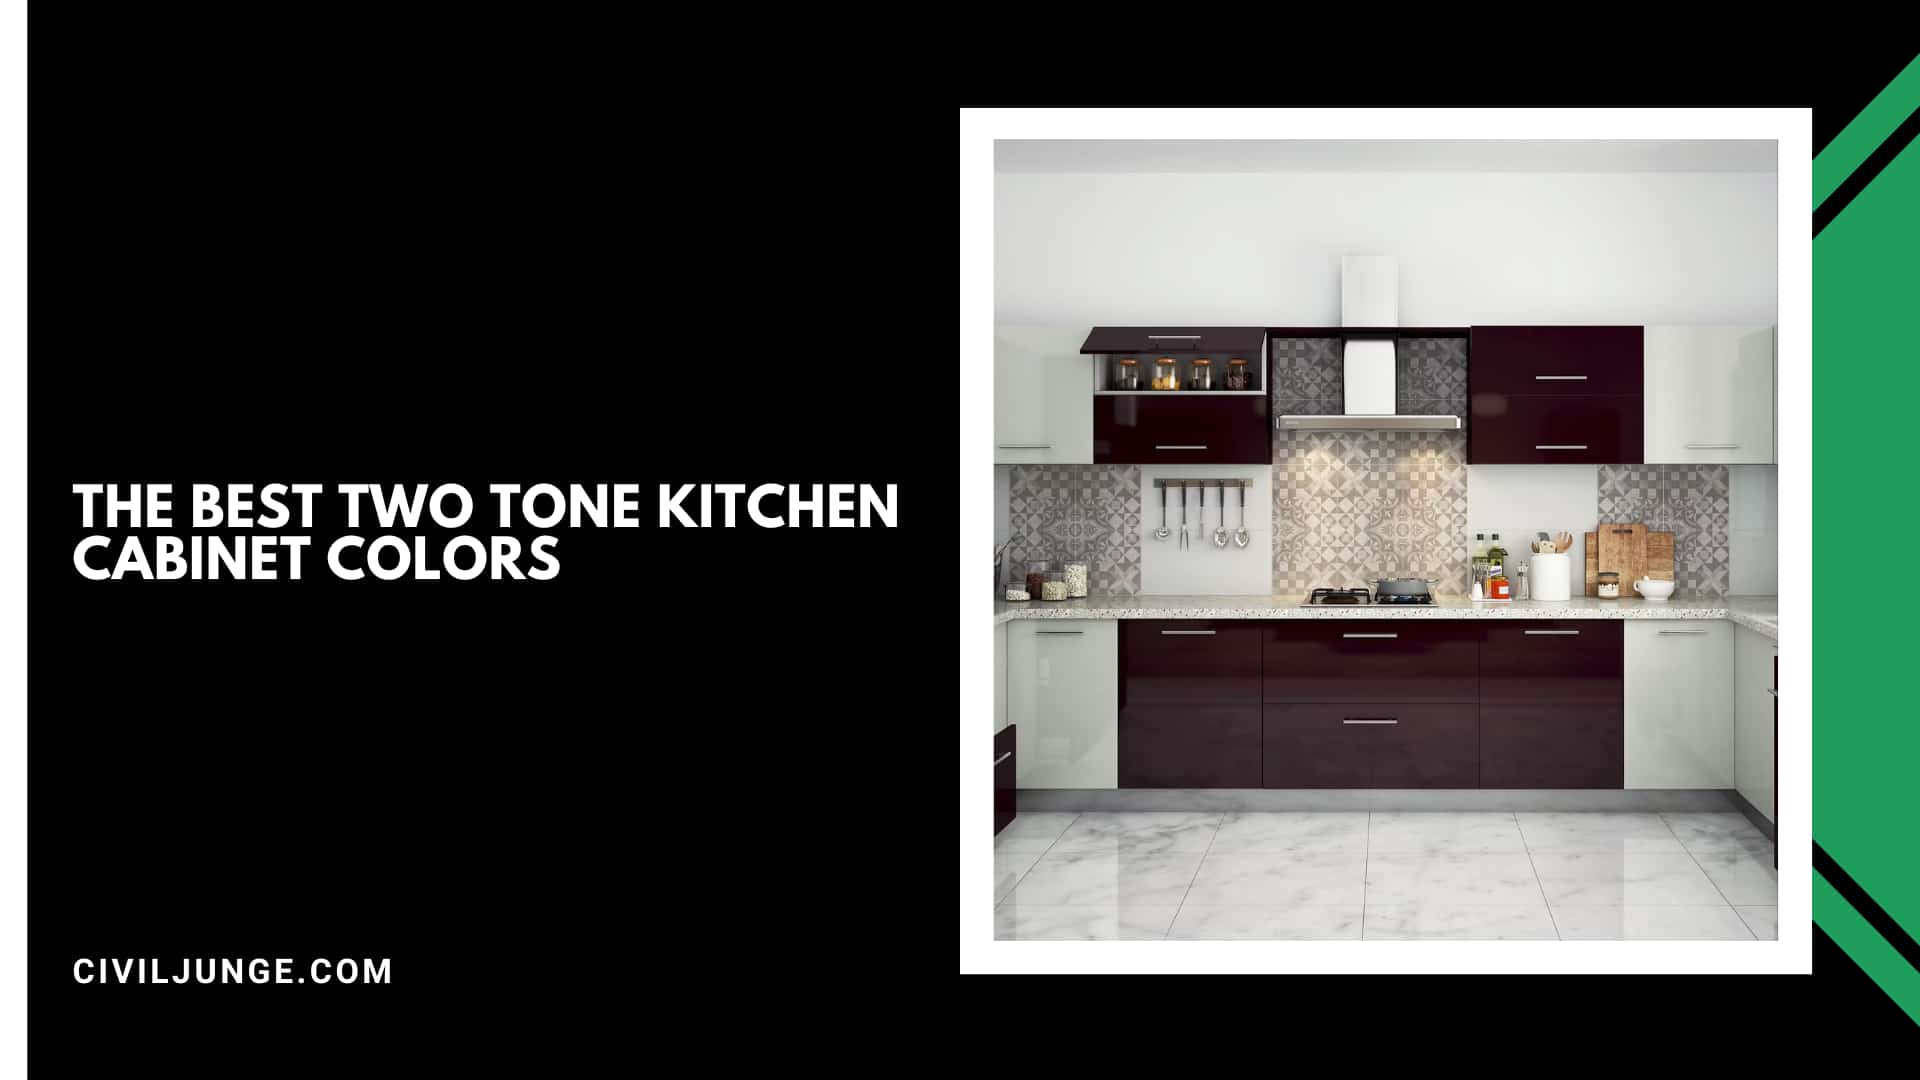 The Best Two Tone Kitchen Cabinet Colors